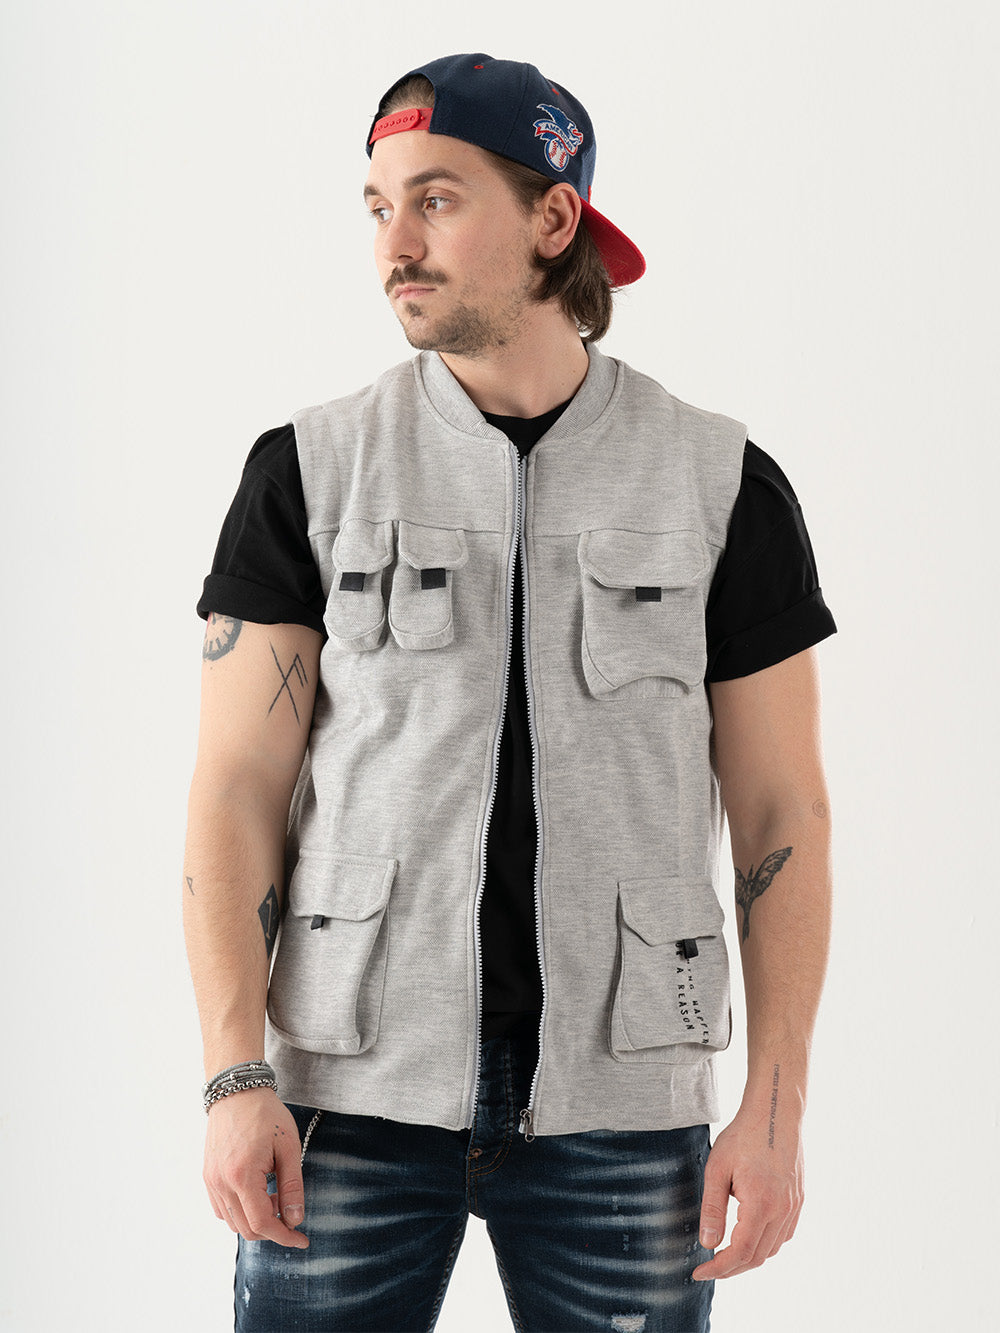 A man wearing a FREESPIRIT VEST with cargo pockets and a hat.